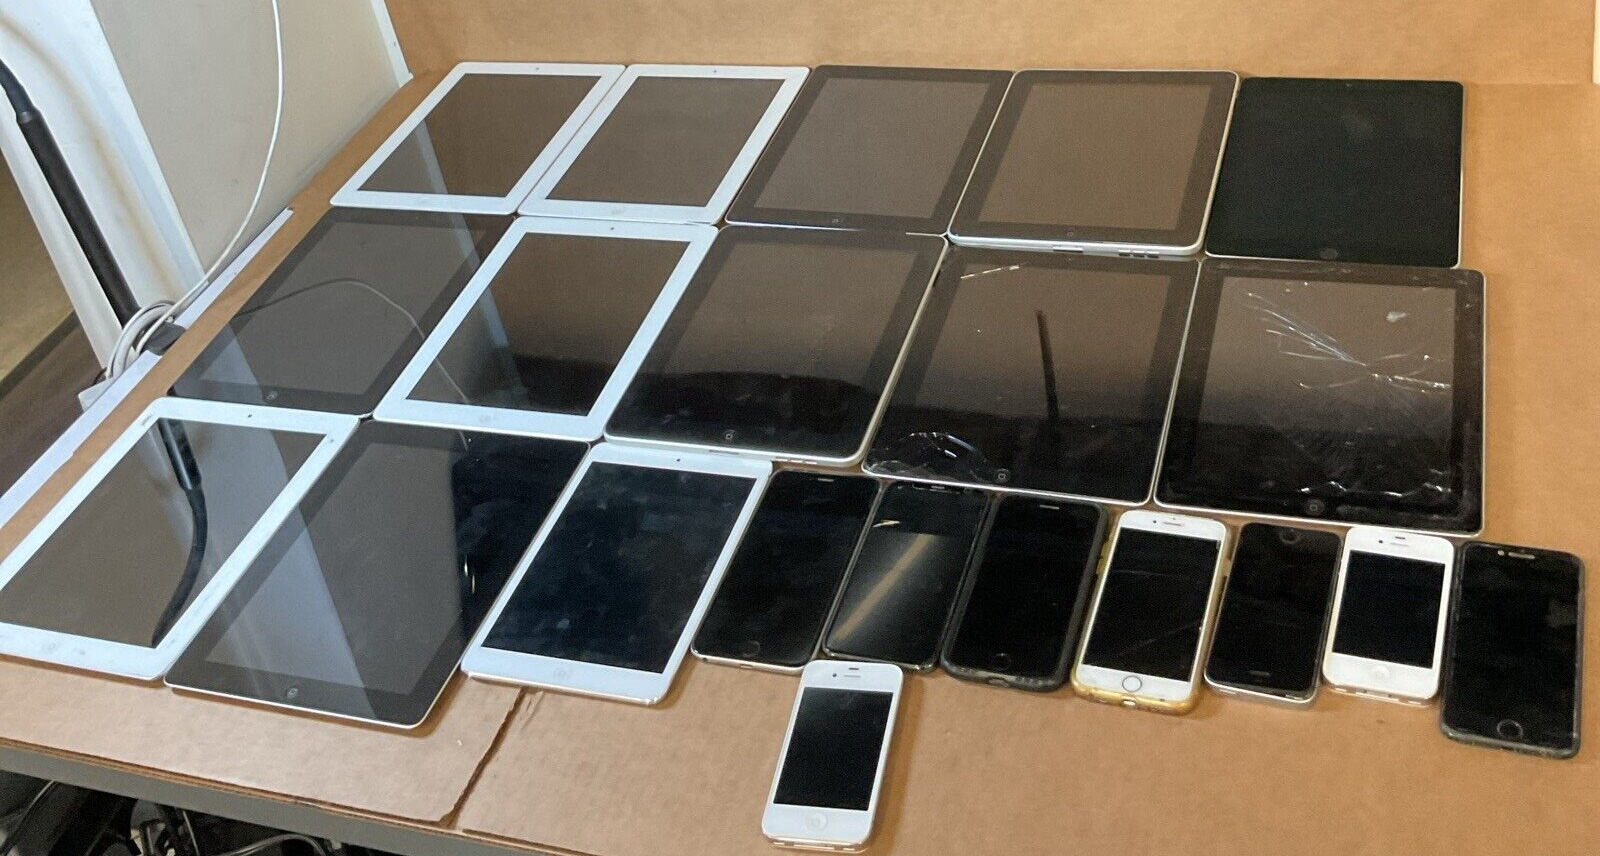 LOT OF 21 - Apple iPhones and iPads bundle - FOR PARTS